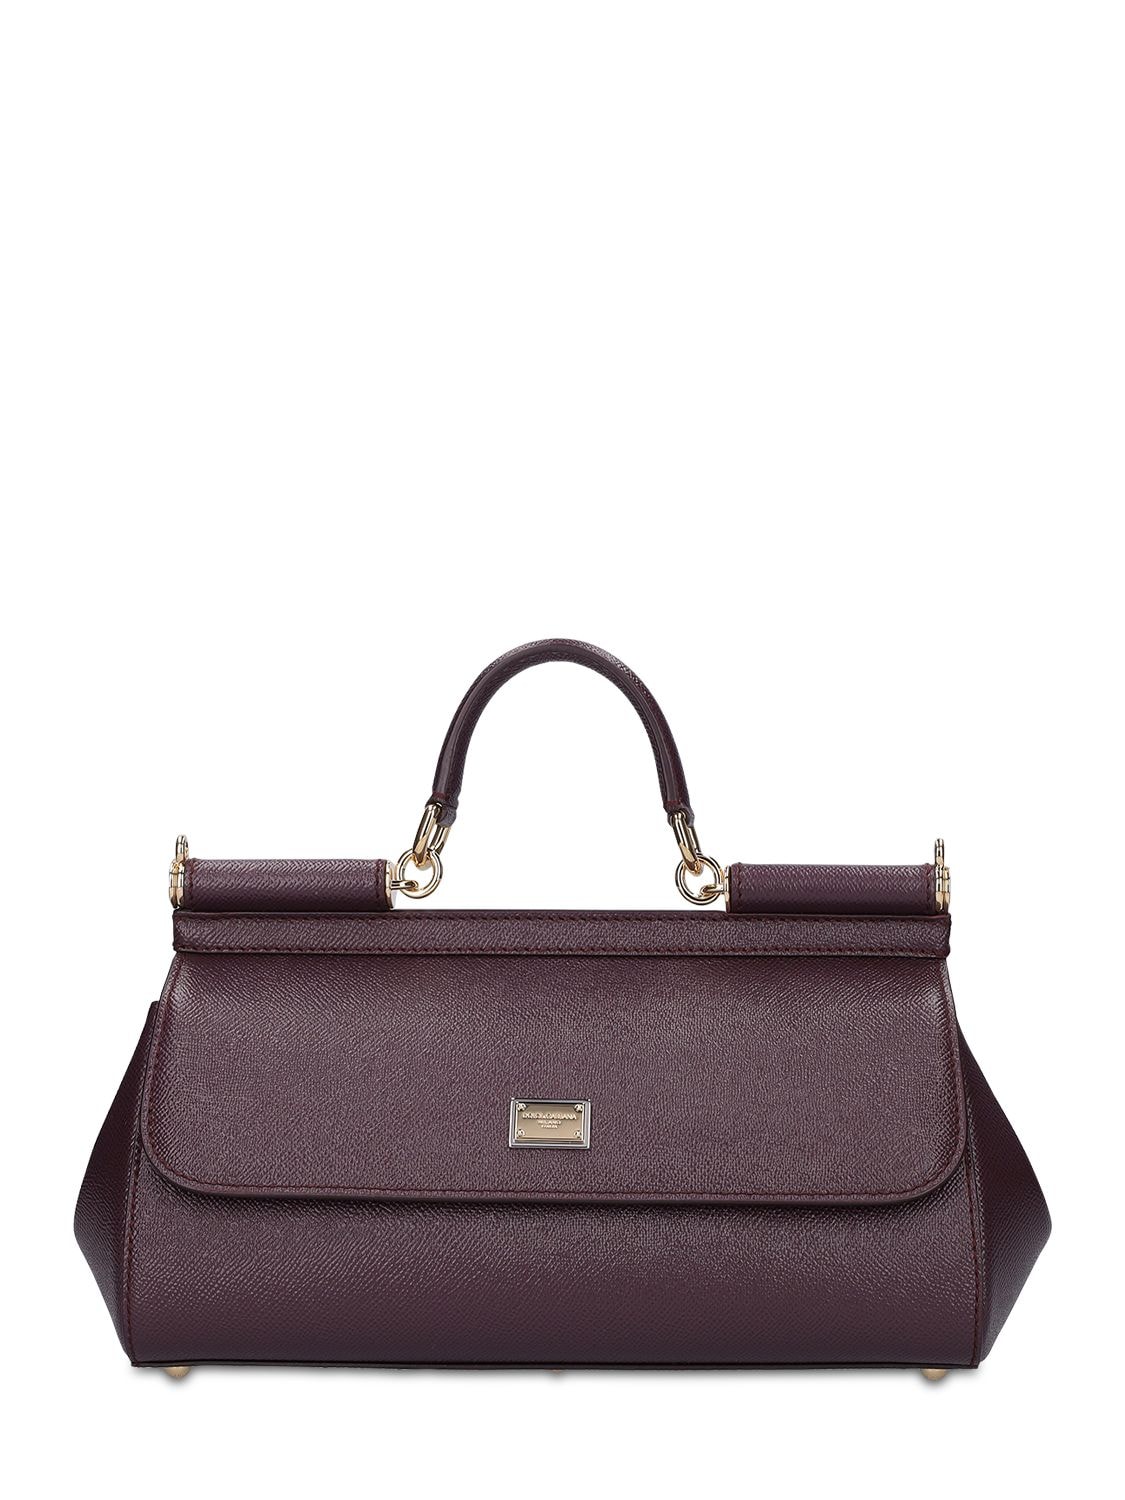 Image of Dauphine New Sicily Top Handle Bag